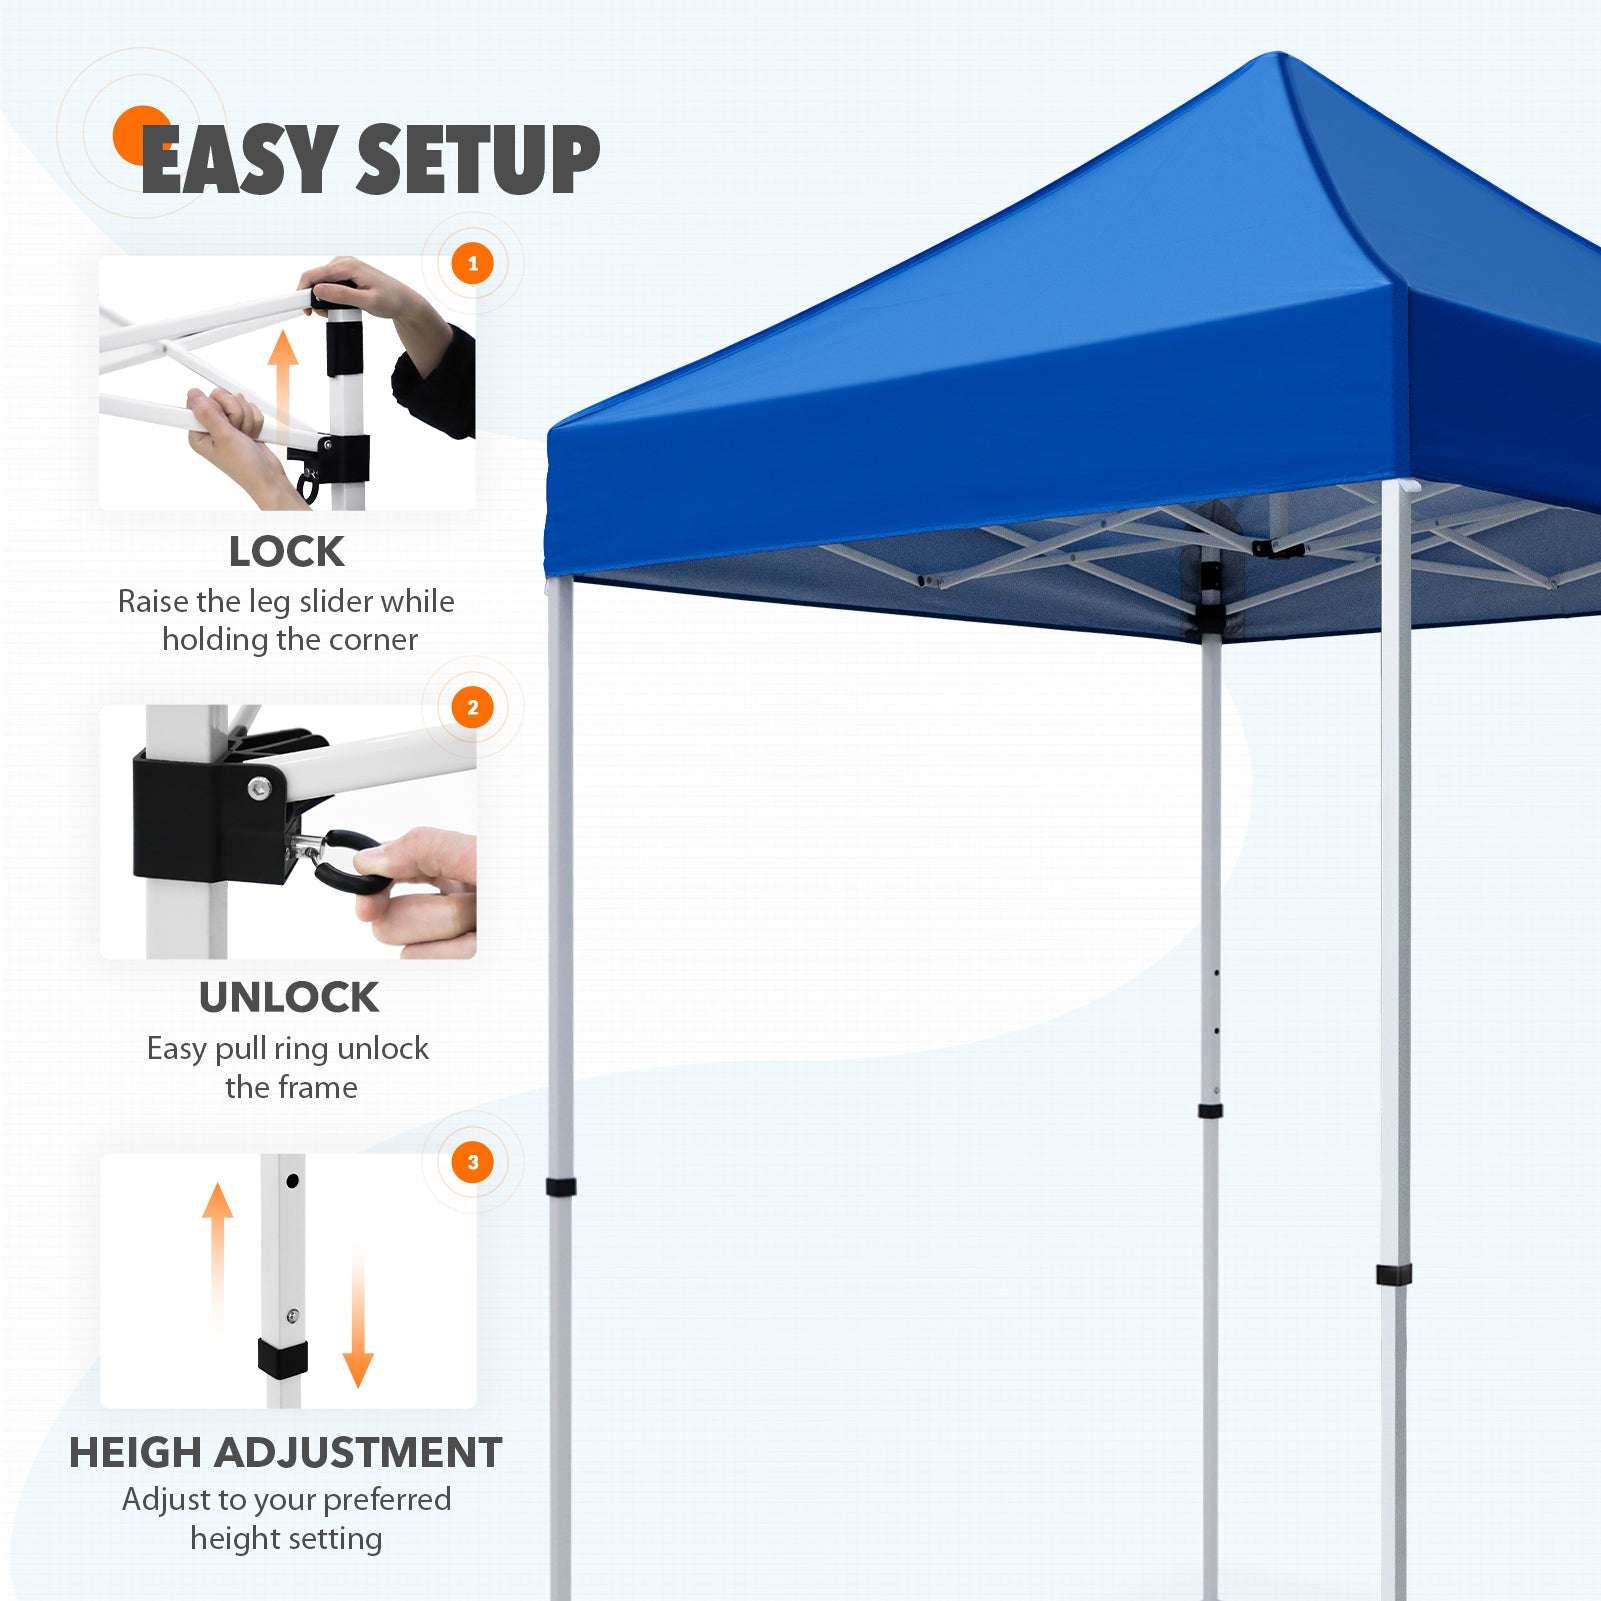 EAGLE PEAK 5x5 Pop Up Canopy Tent Instant Outdoor Canopy Easy Set-up S